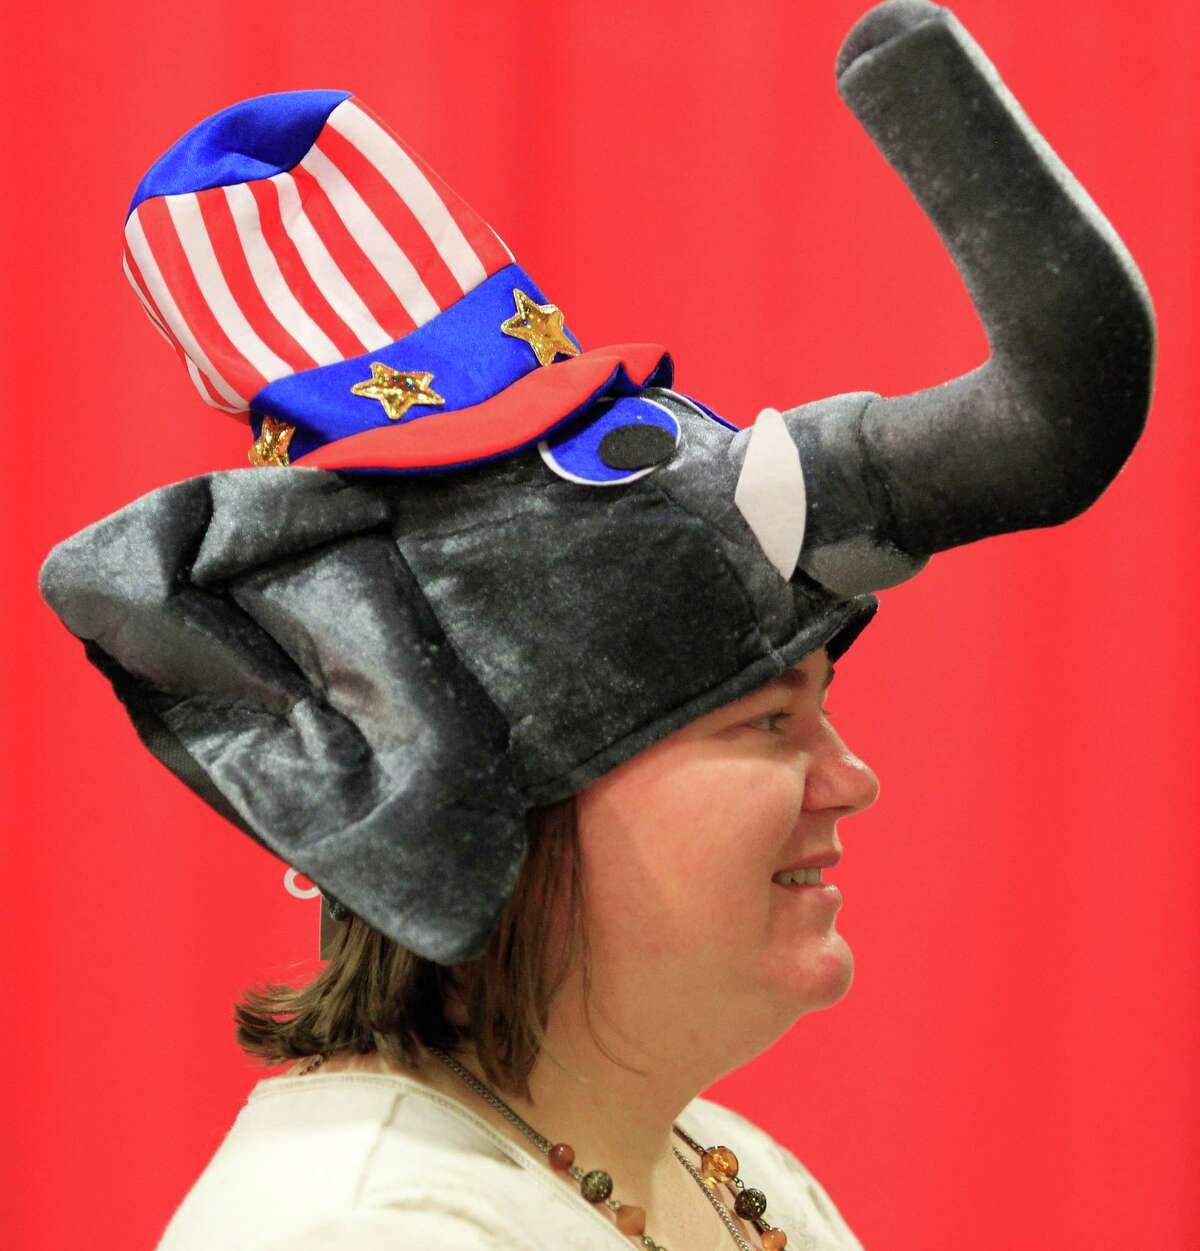 Tea Party volunteer Margaret Foland, from Arlington, Texas, wears another style of elephant hat available in the vendor area on the convention center floor as people arrive, Wednesday, June 4, 2014, for the Republican Party of Texas state convention (starting Thursday, June 5) at the Fort Worth Convention Center in Fort Worth, Texas. (AP Photo/Star-Telegram, Paul Moseley) MAGAZINES OUT; (FORT WORTH WEEKLY, 360 WEST); INTERNET OUT.